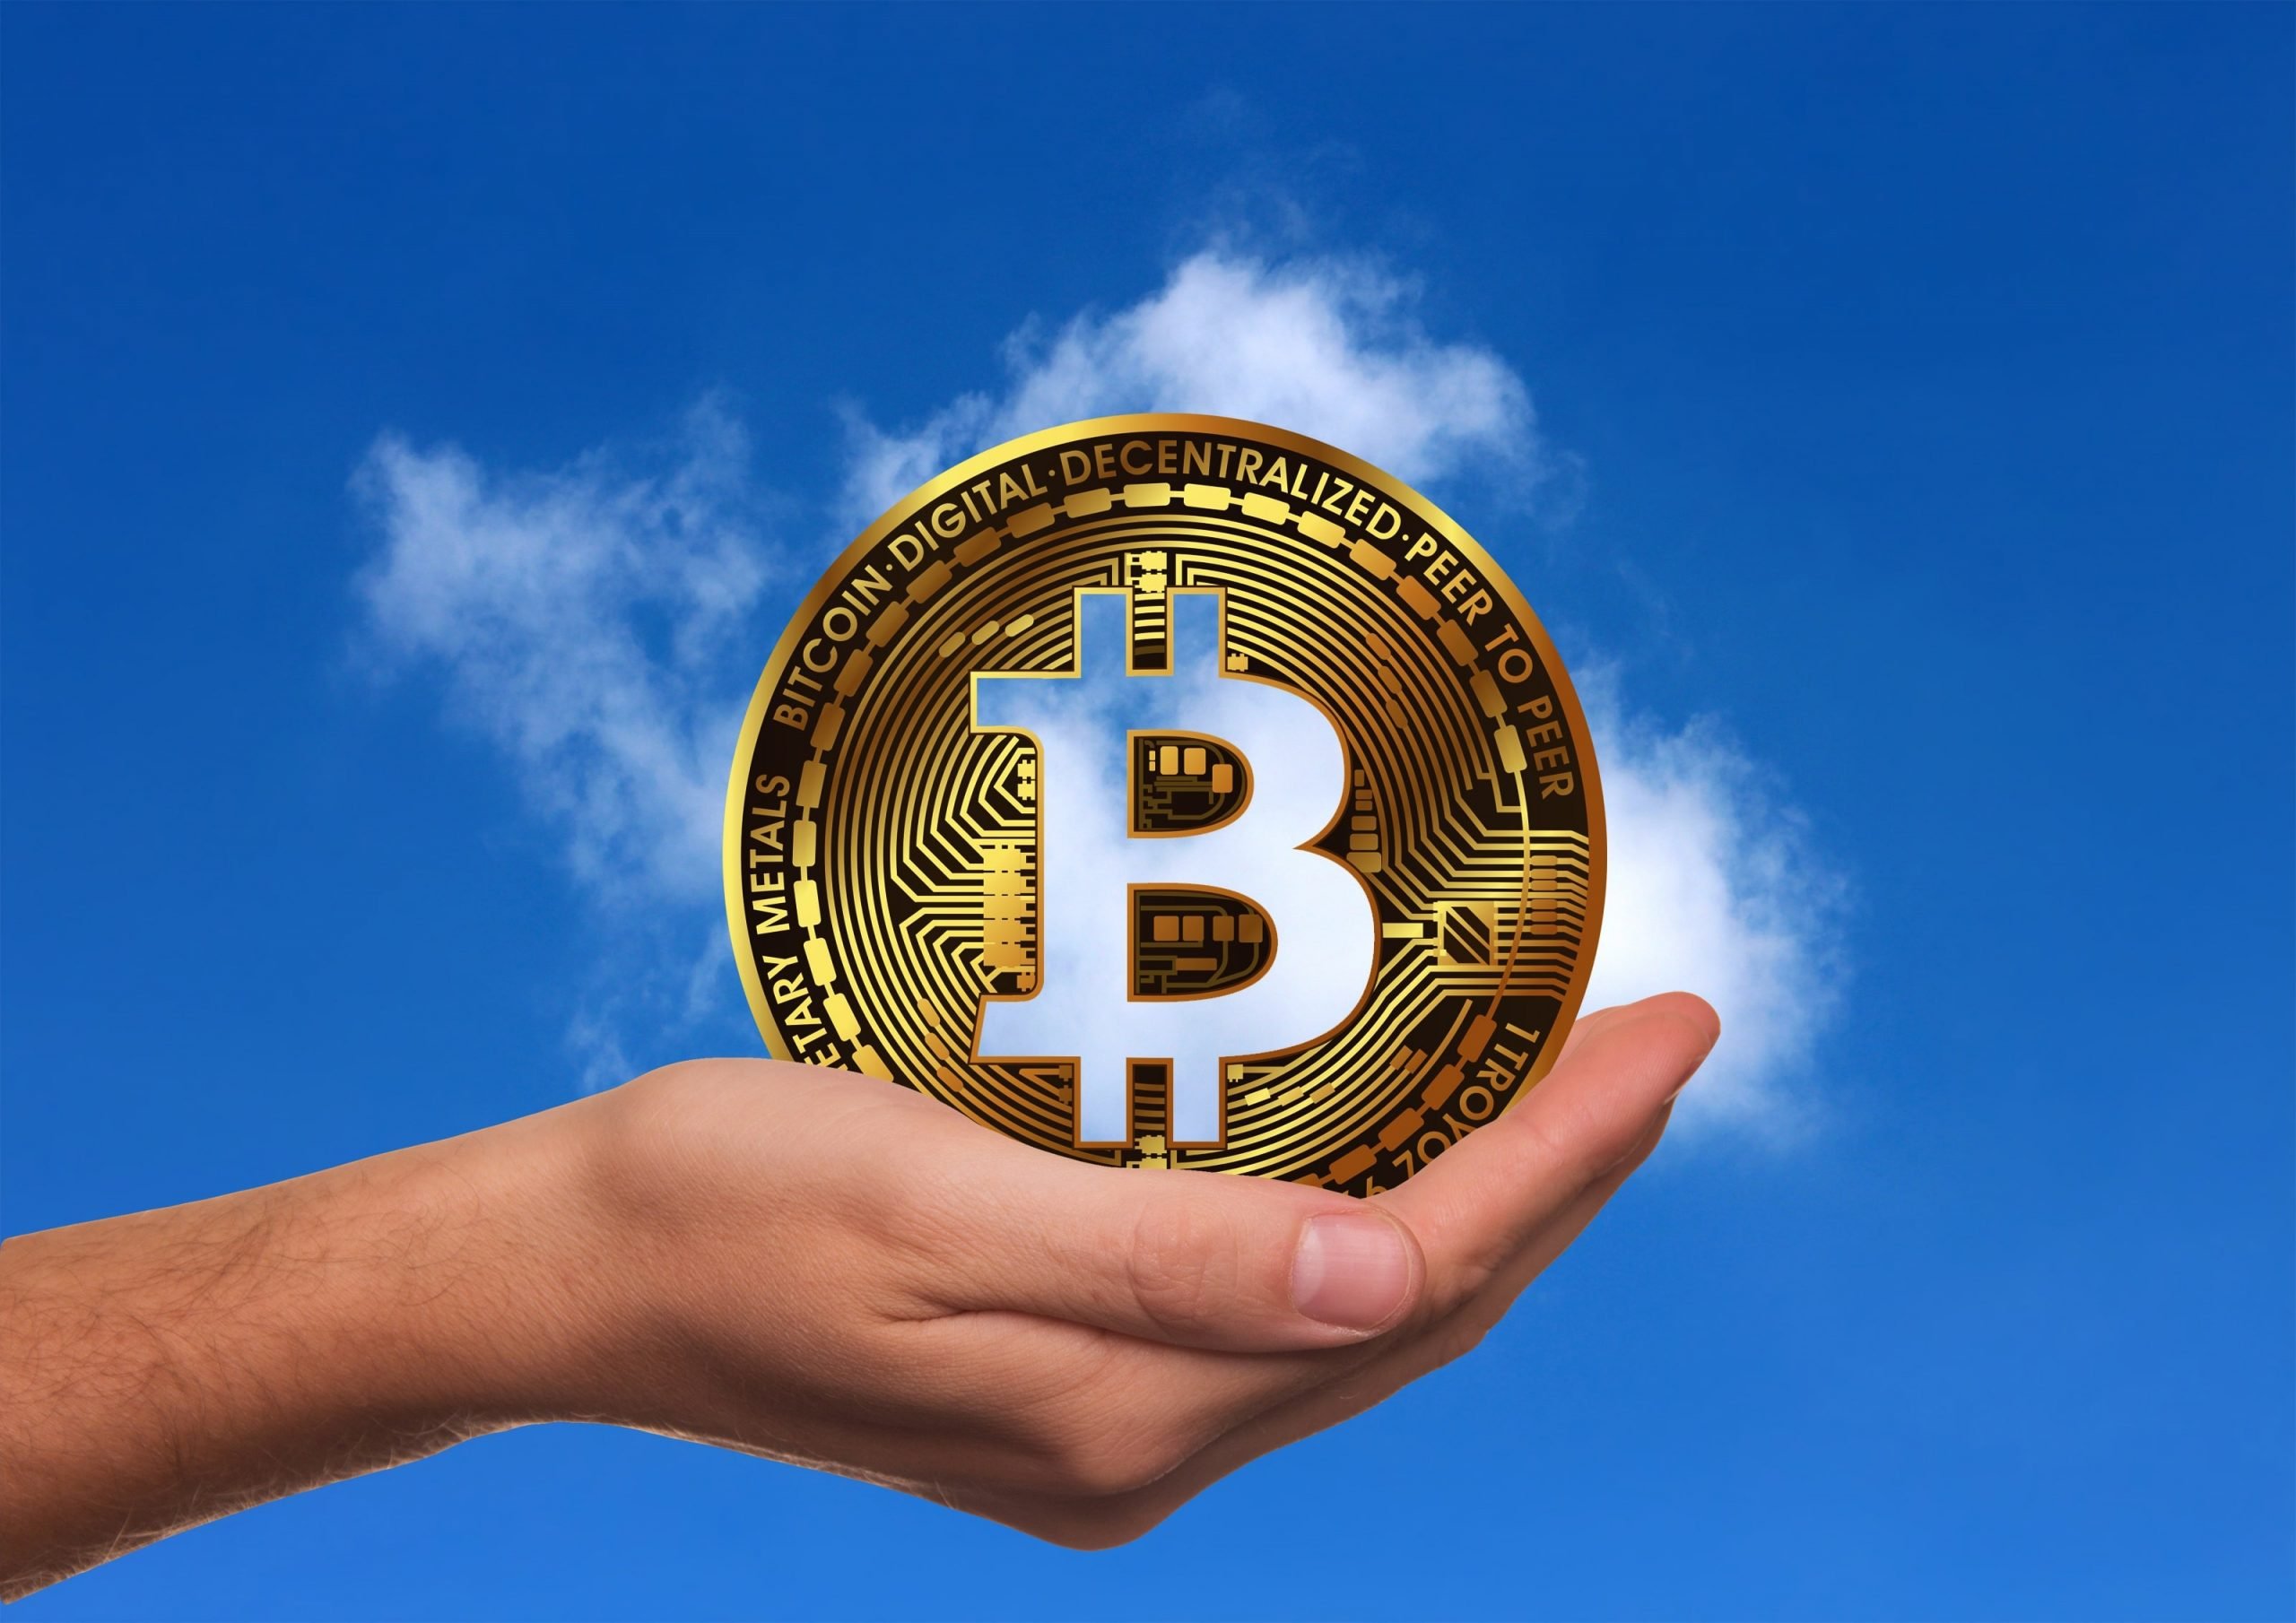 Image of Bitcoin against sky background. Green cryptocurrency may use solar energy to harness the energy required